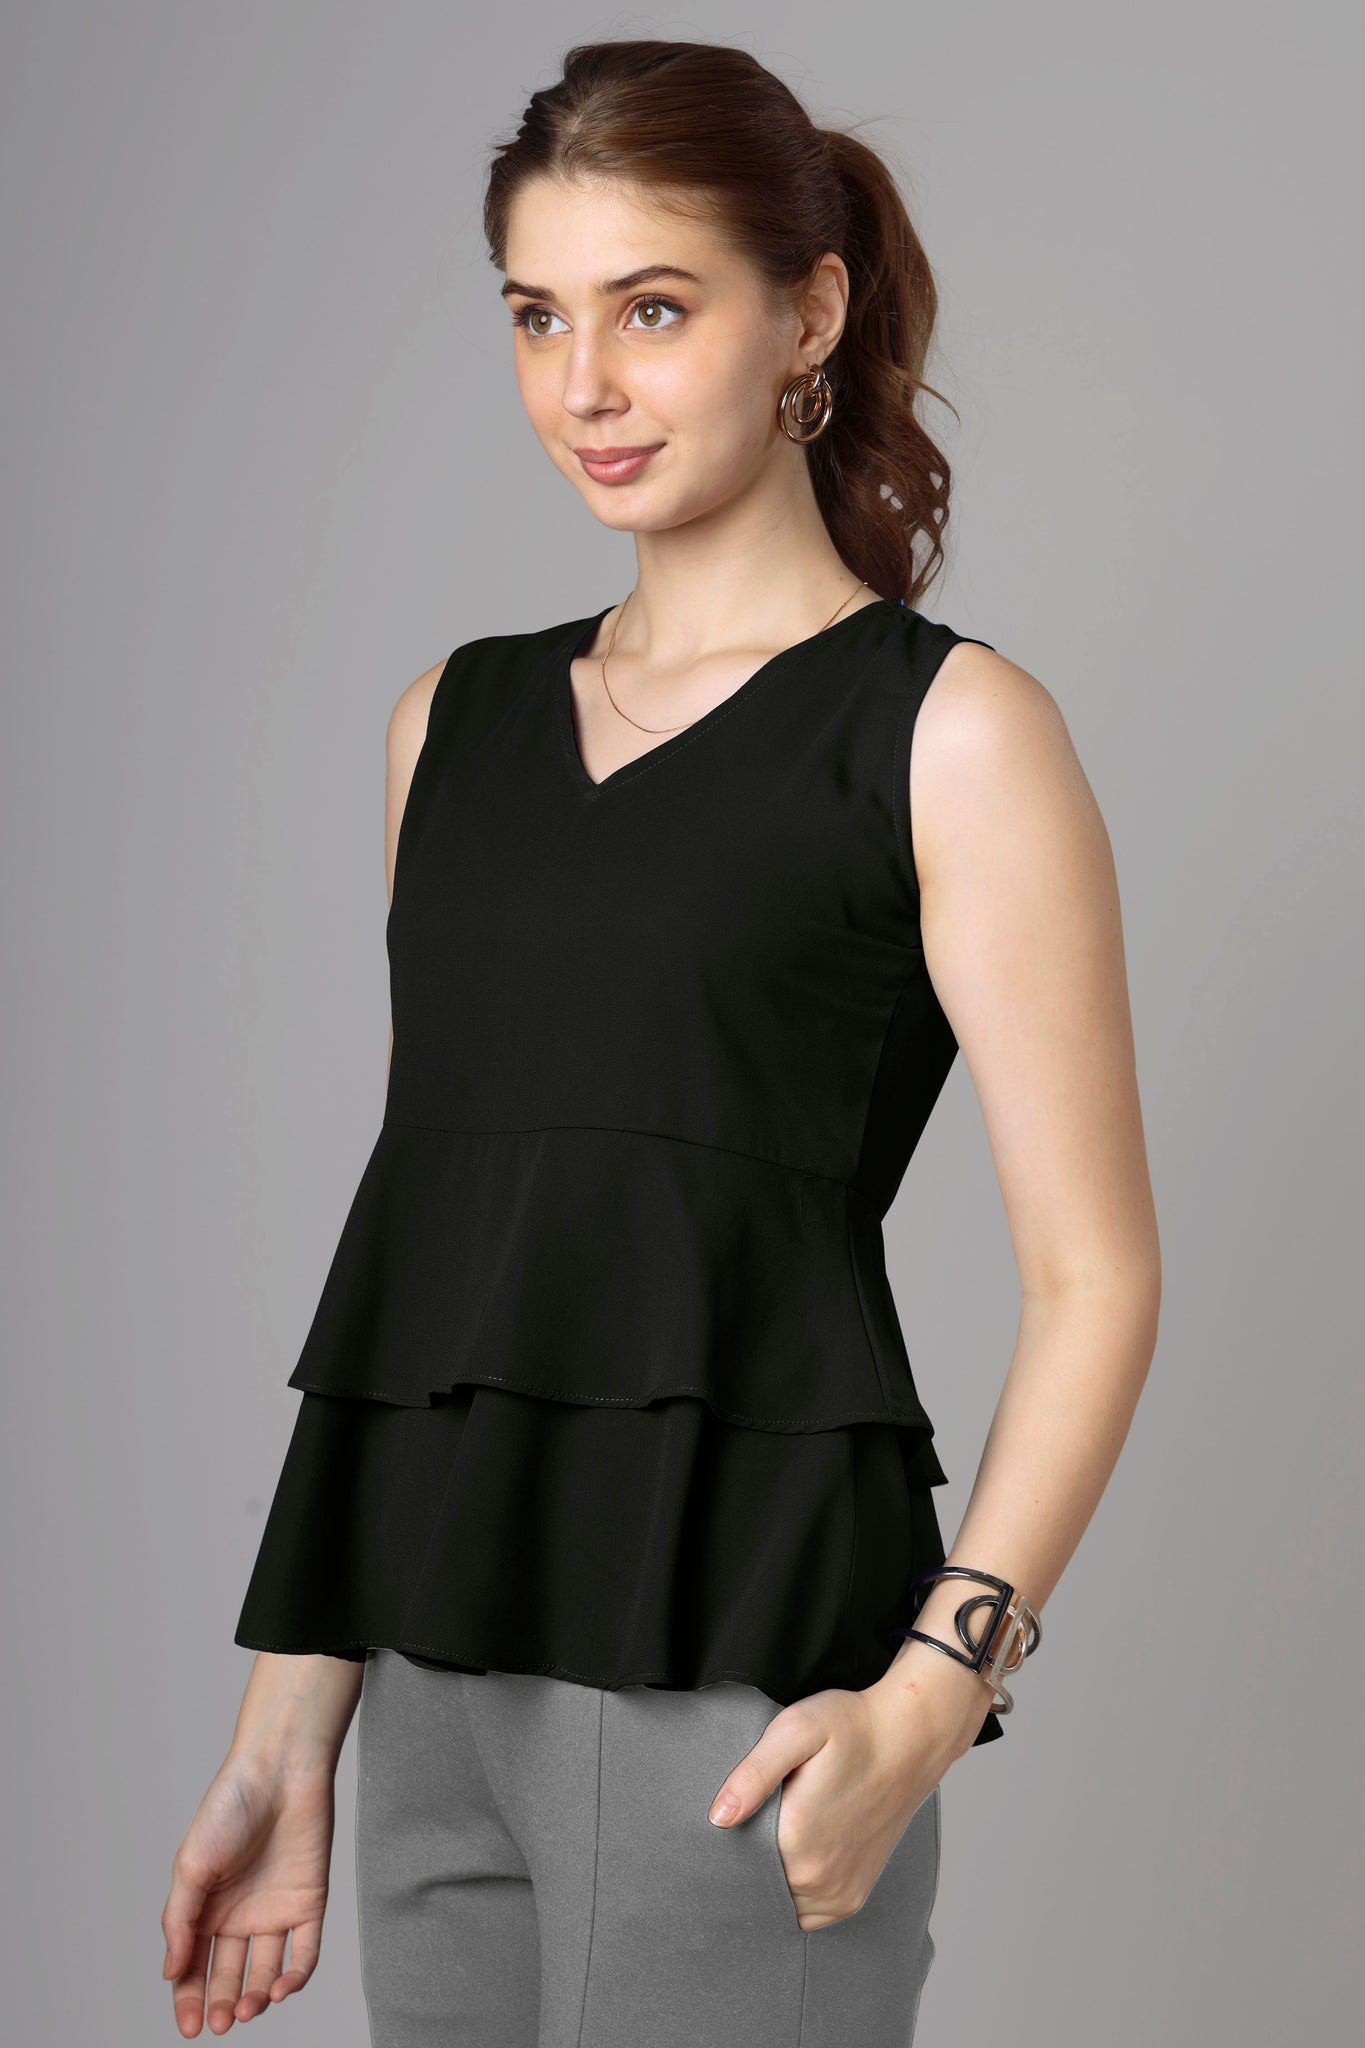 Black Casual Top For Women